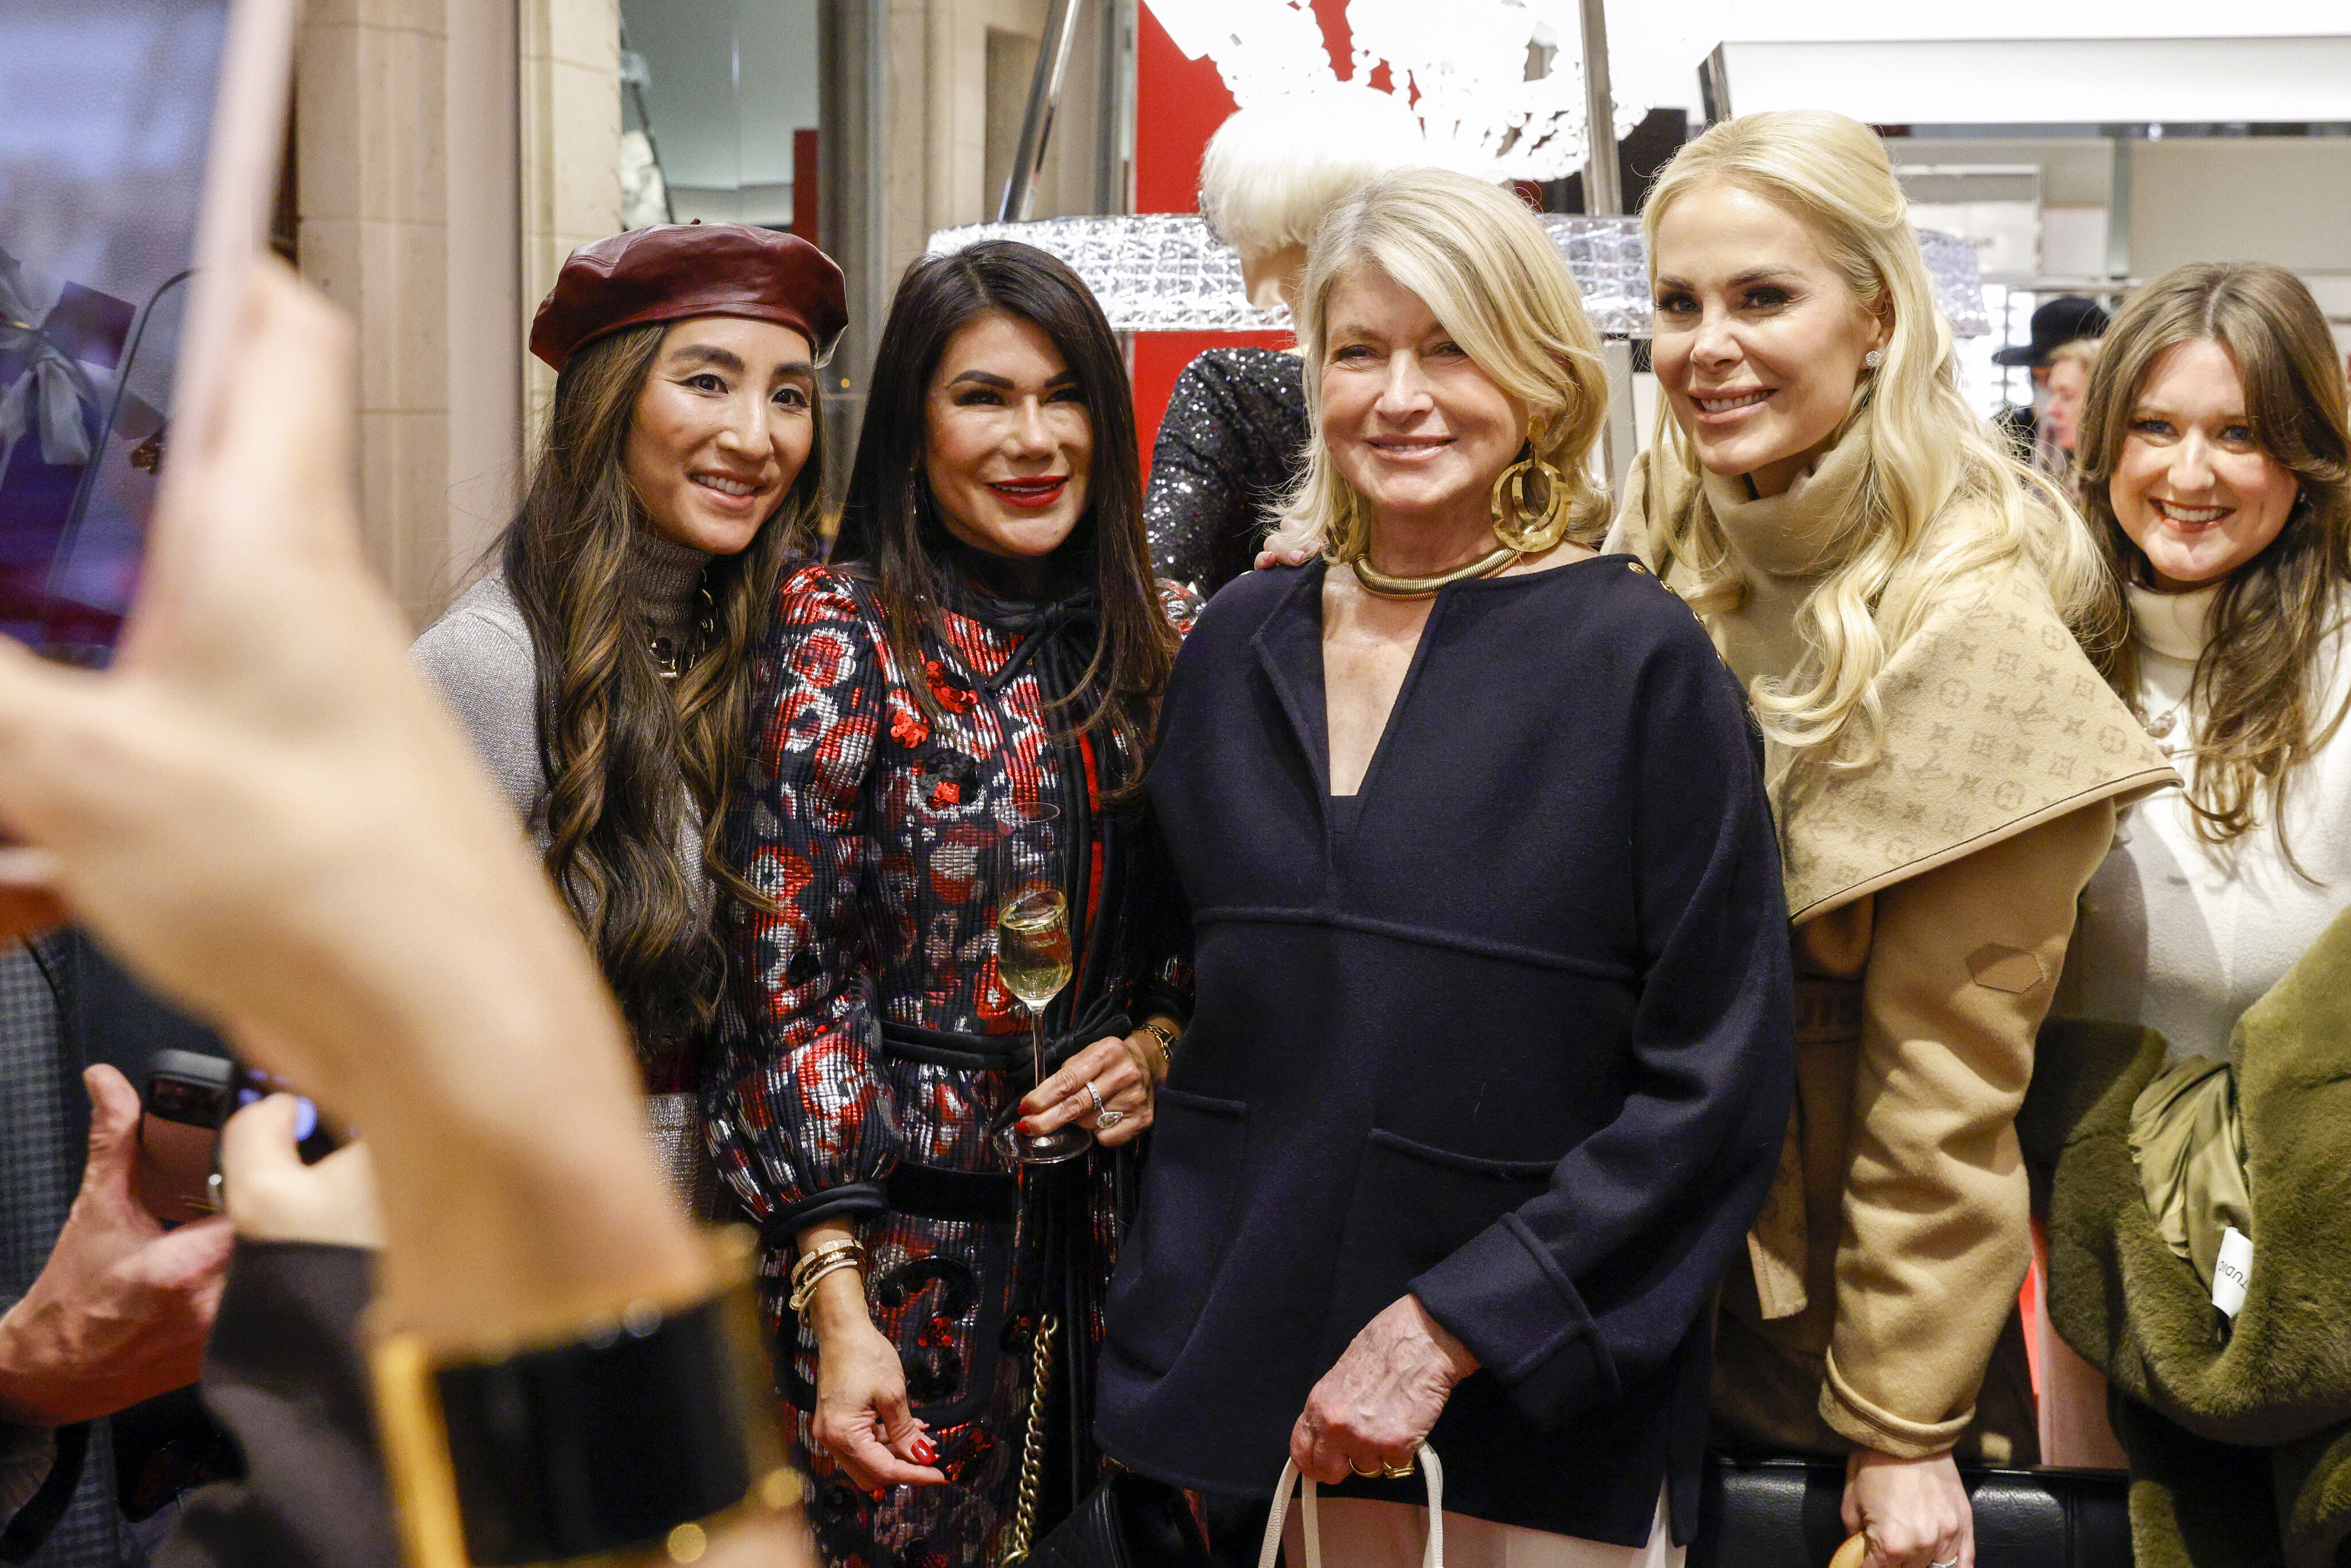 Neiman Marcus Downtown Dallas has just the tree for holiday blingy selfies  - CultureMap Dallas